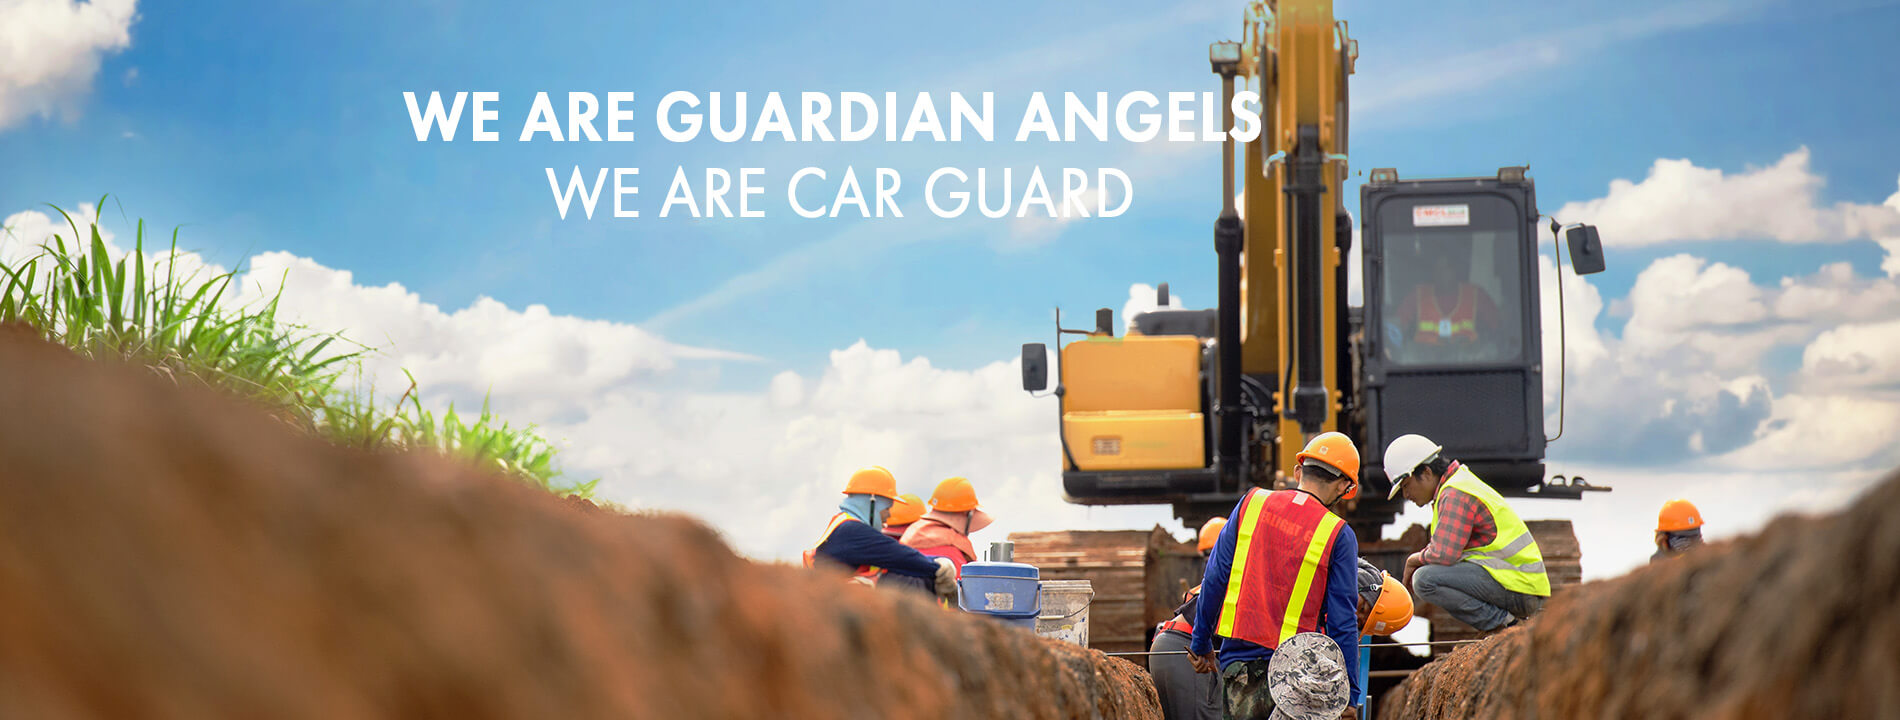 We are guardian angels - We are Car Guard